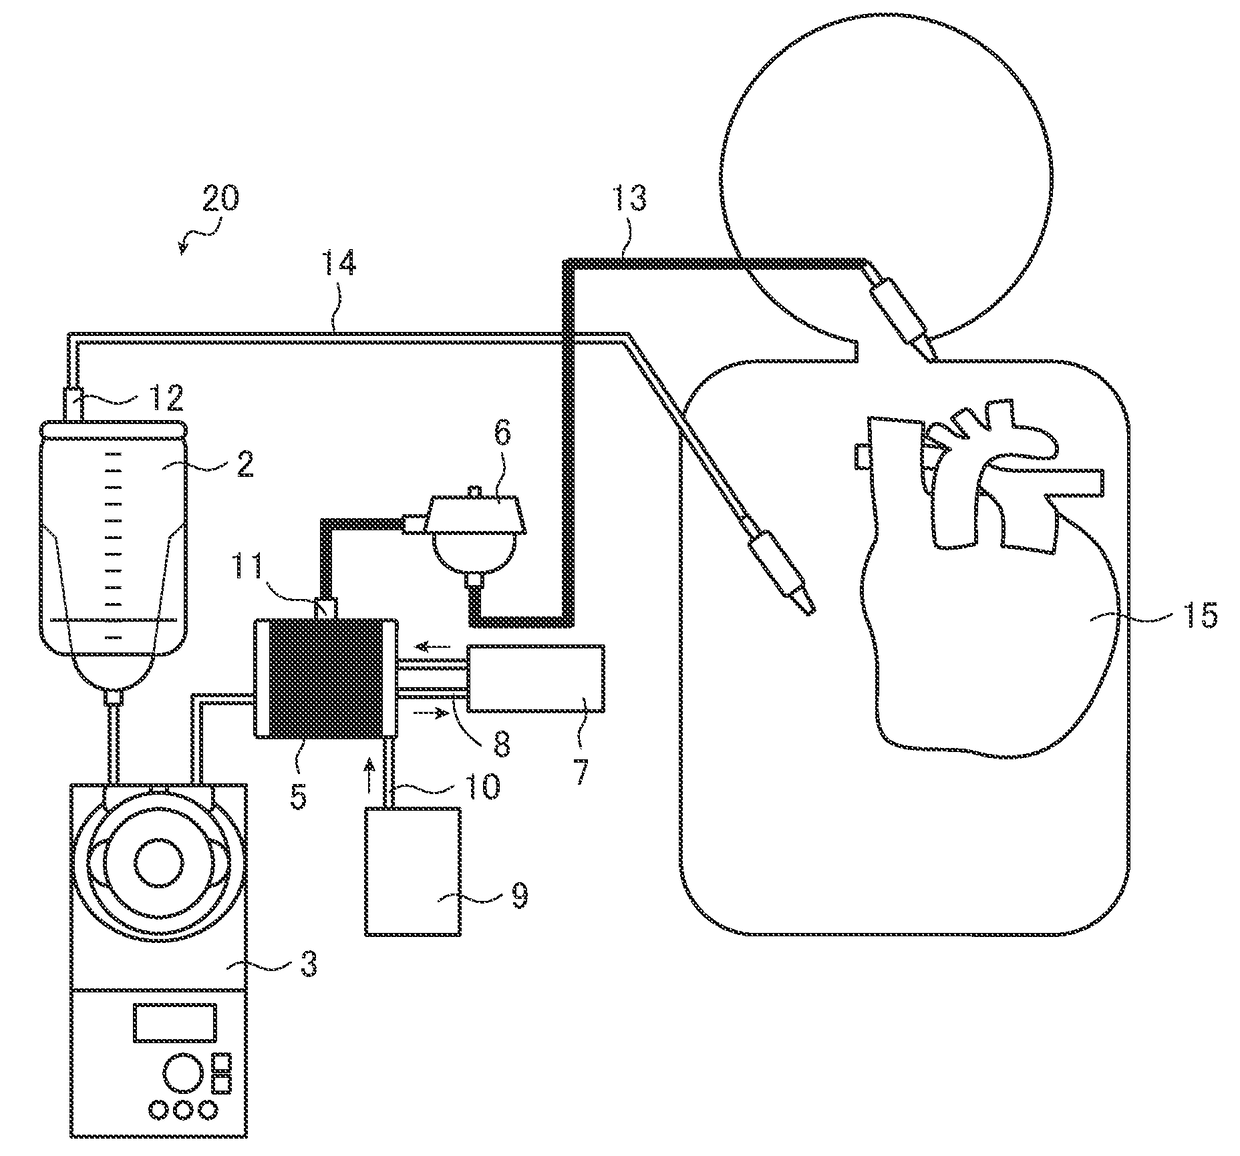 Artificial lung and artificial heart-lung circuit device